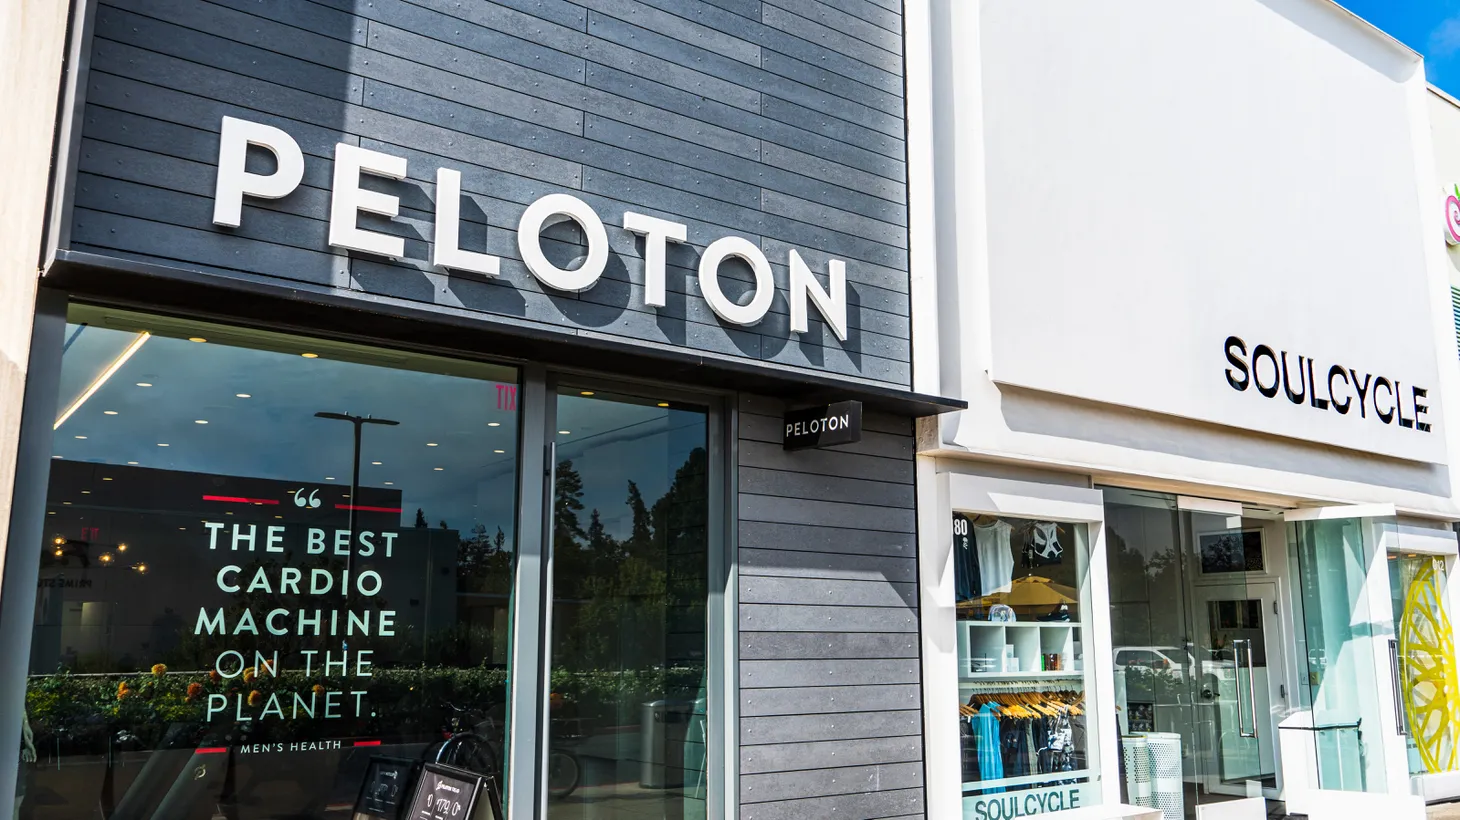 Peloton and Soulcycle stores are located next to each other in a Stanford shopping center. Both companies have faced economic losses and must reconsider how they’ll operate going forward.